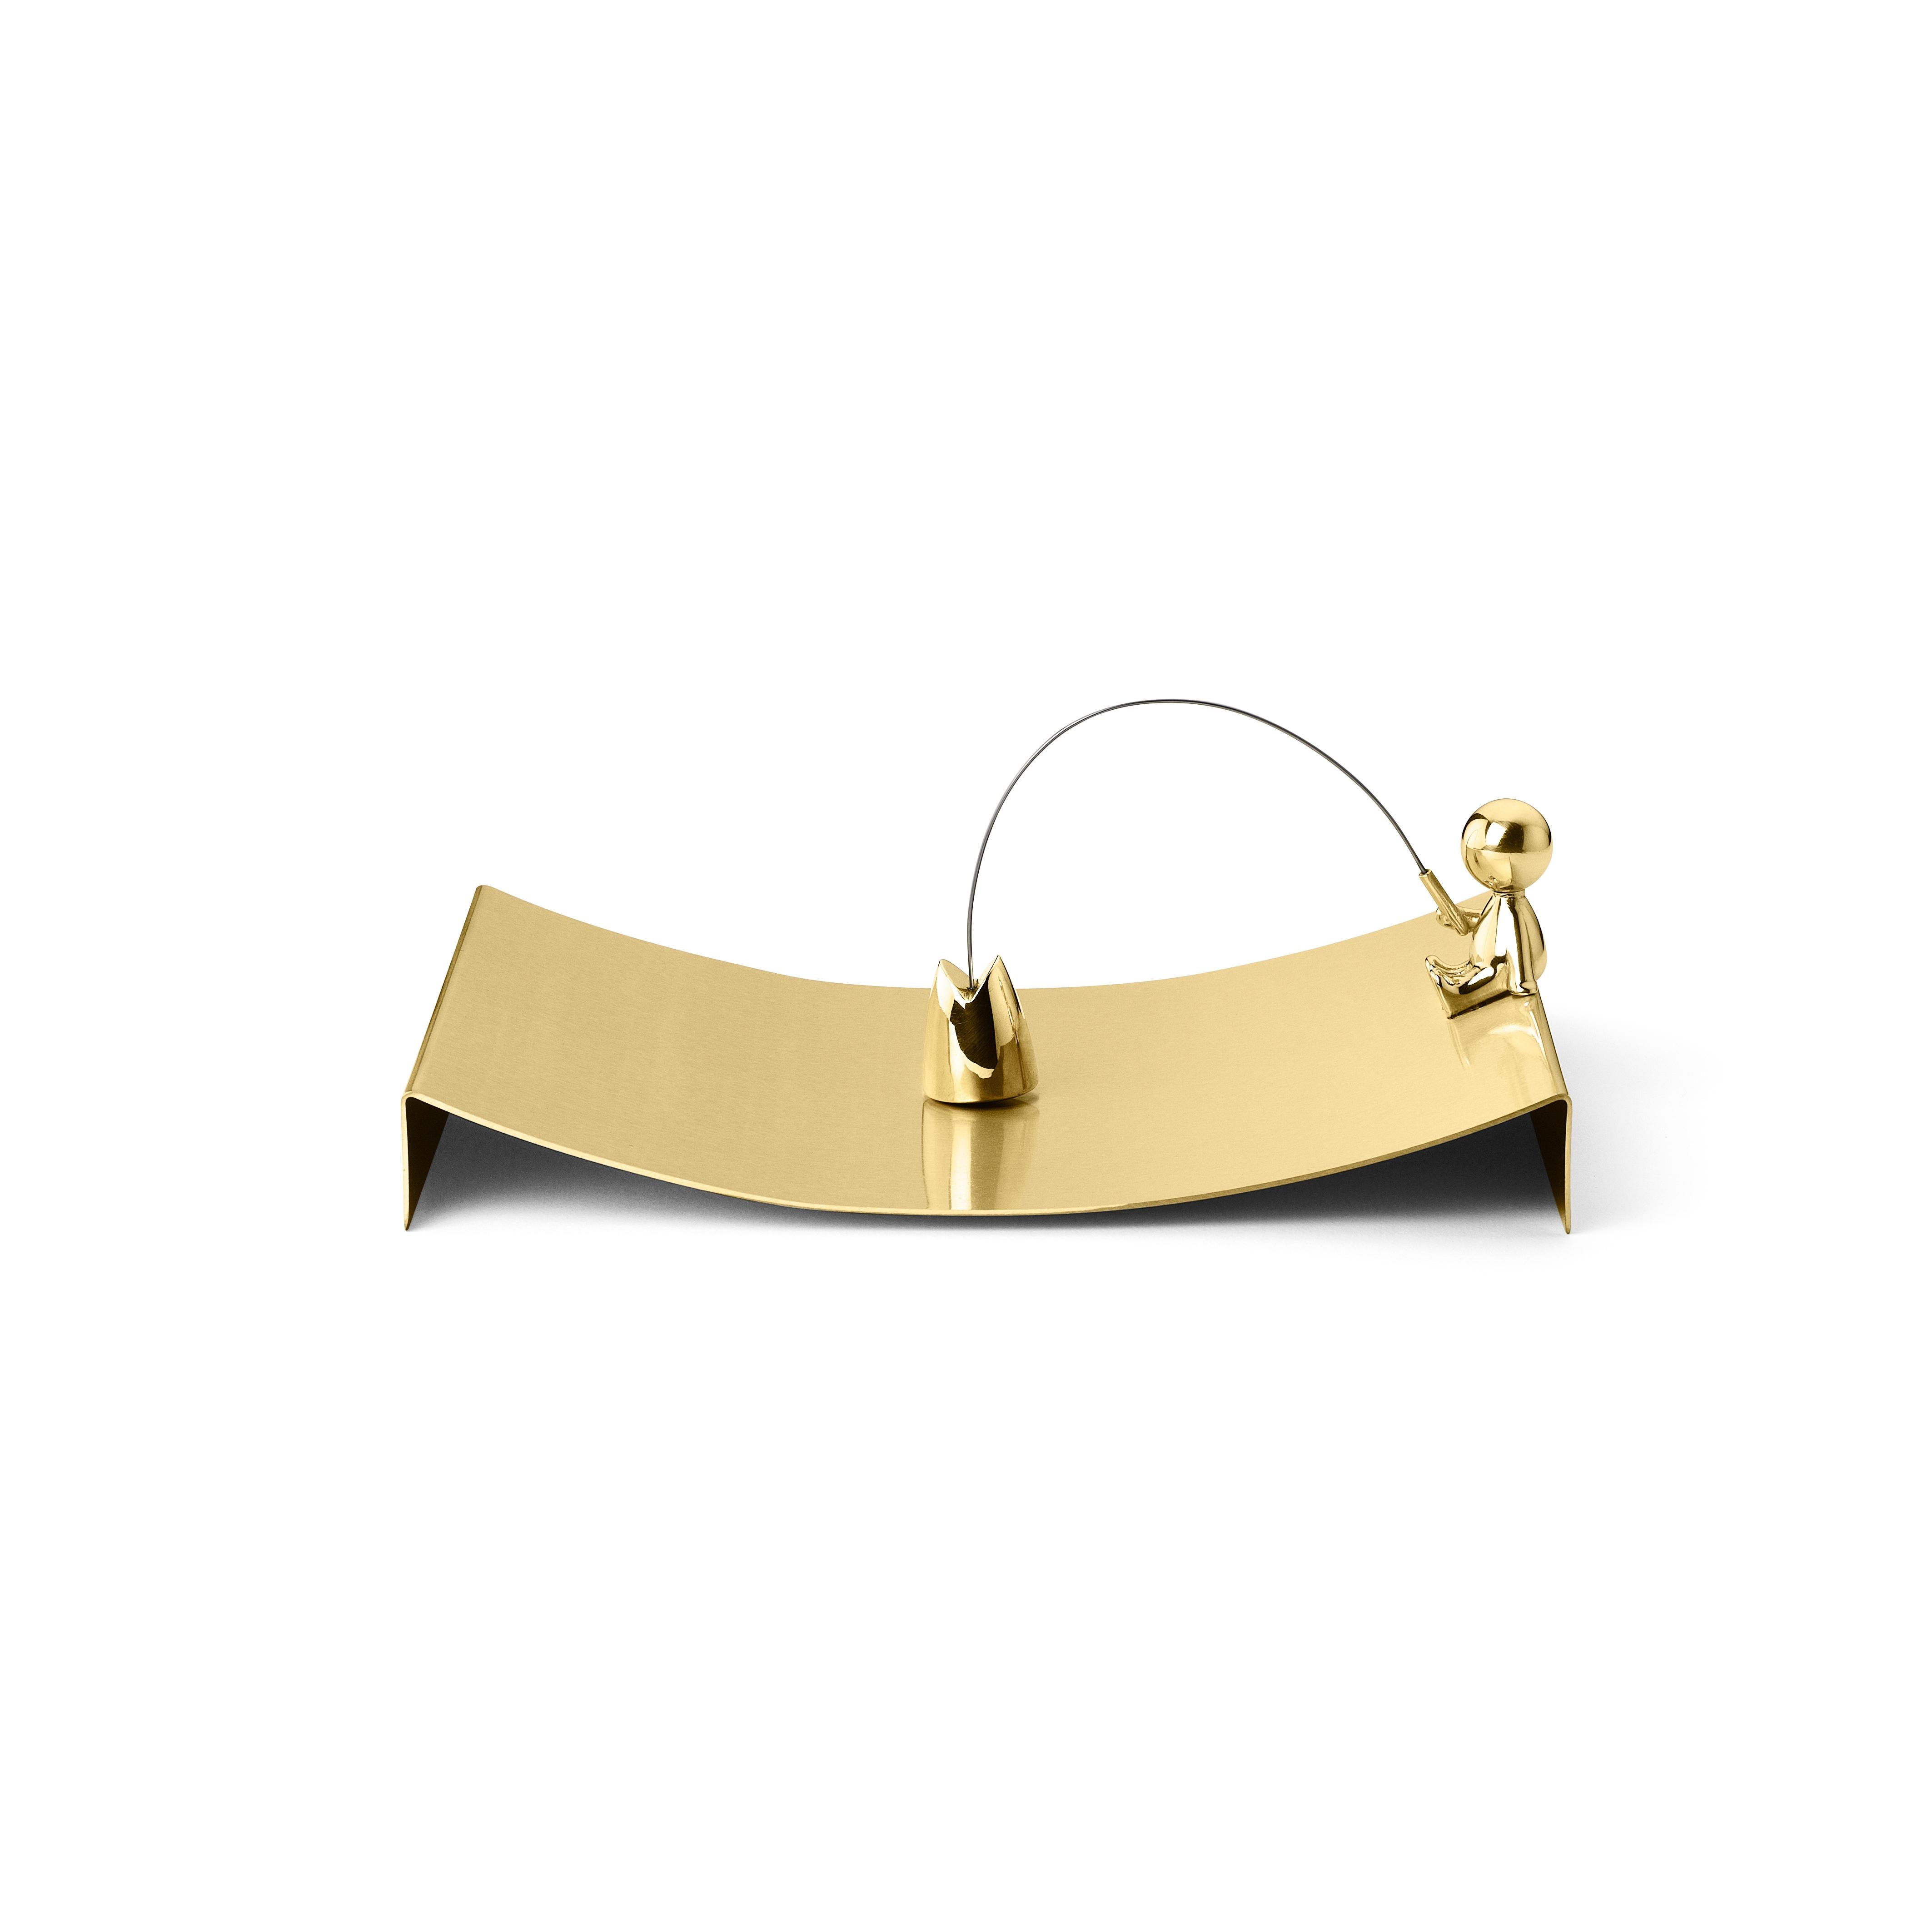 Napkins holder in brass
Omini is a family of products that plays on the inclusion and the relationship between the human figure with a series of monolithic objects from geometric and Minimalist design. Small Lilliputians attack and animate the pure